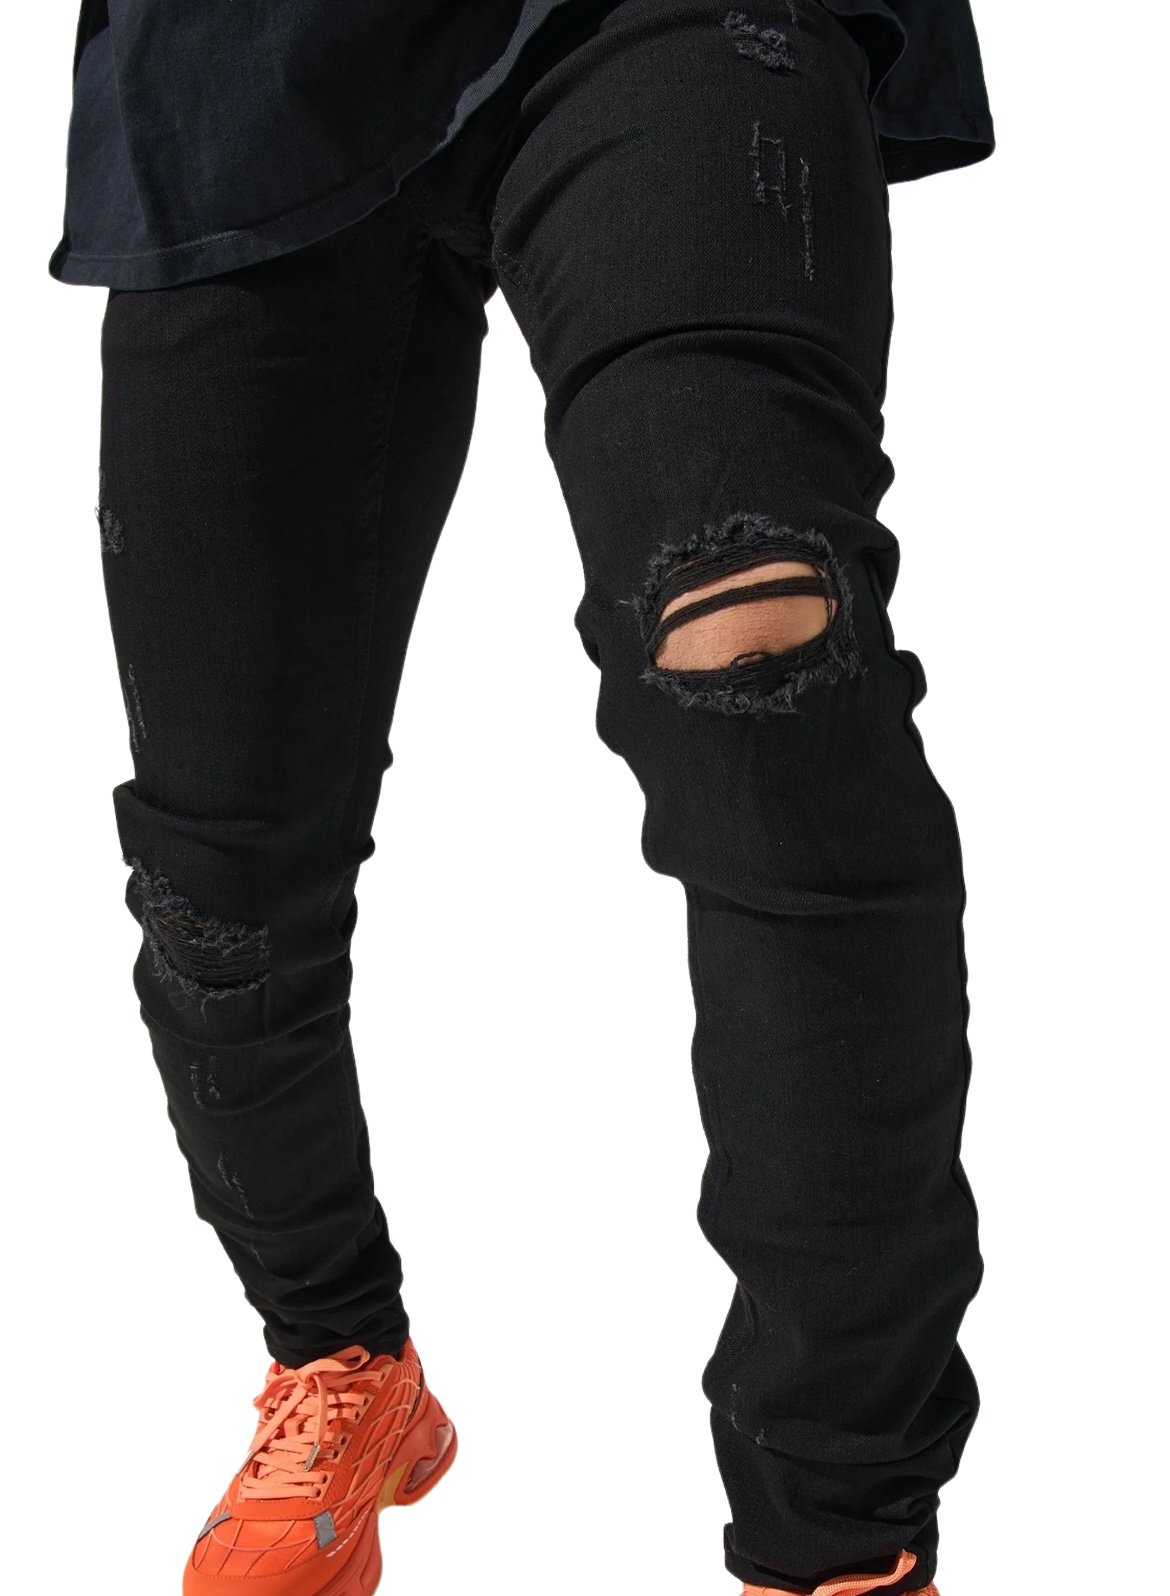 A person wearing SERENEDE MIDNIGHT BLACK distressed jeans with a visible knee hole and orange sneakers.